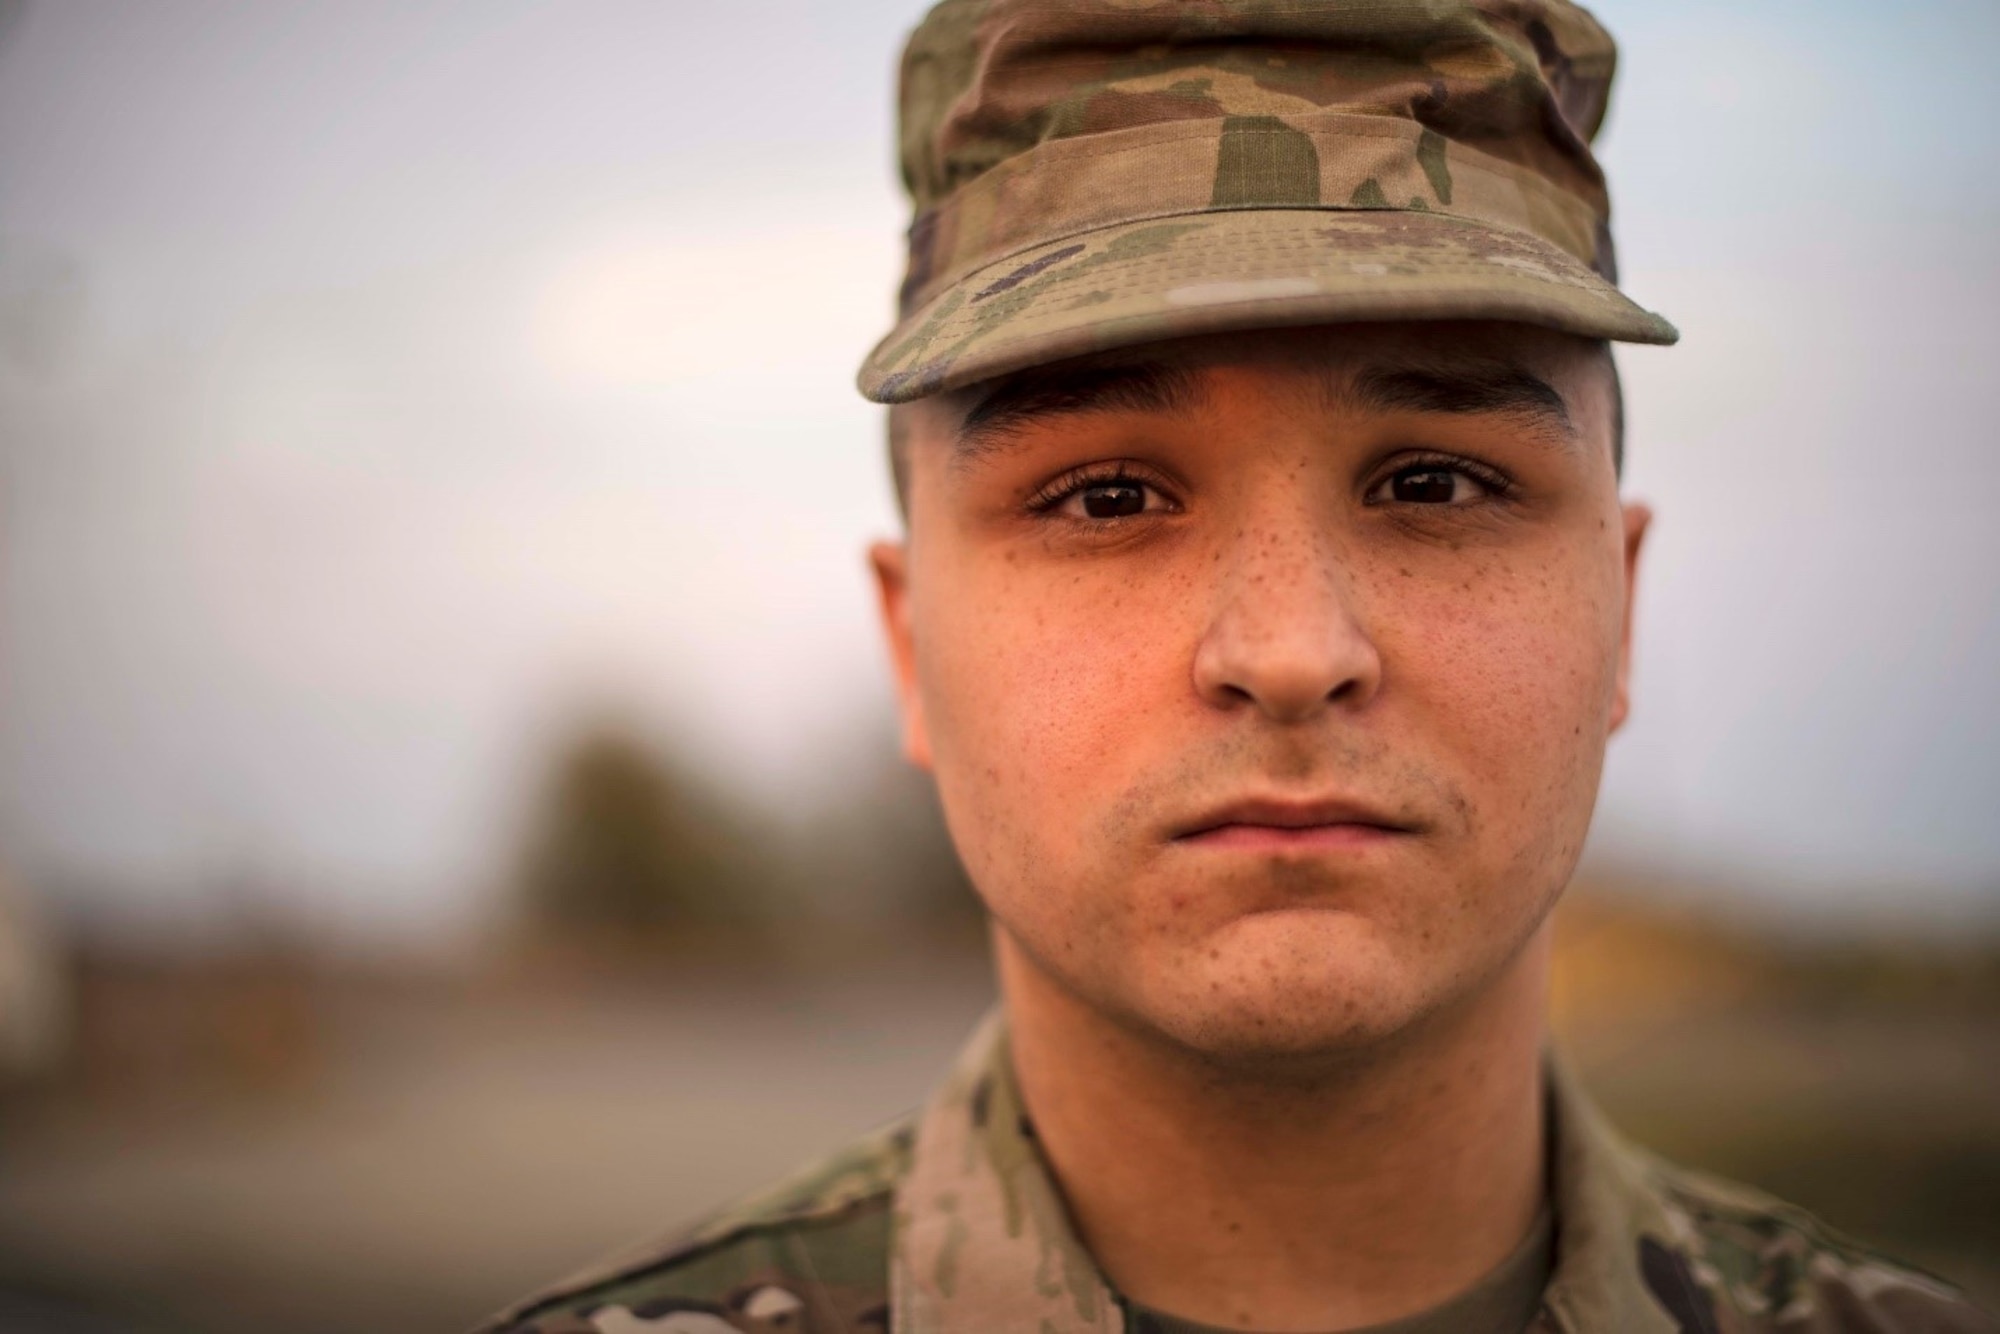 A man in a military uniform stares at the camera.